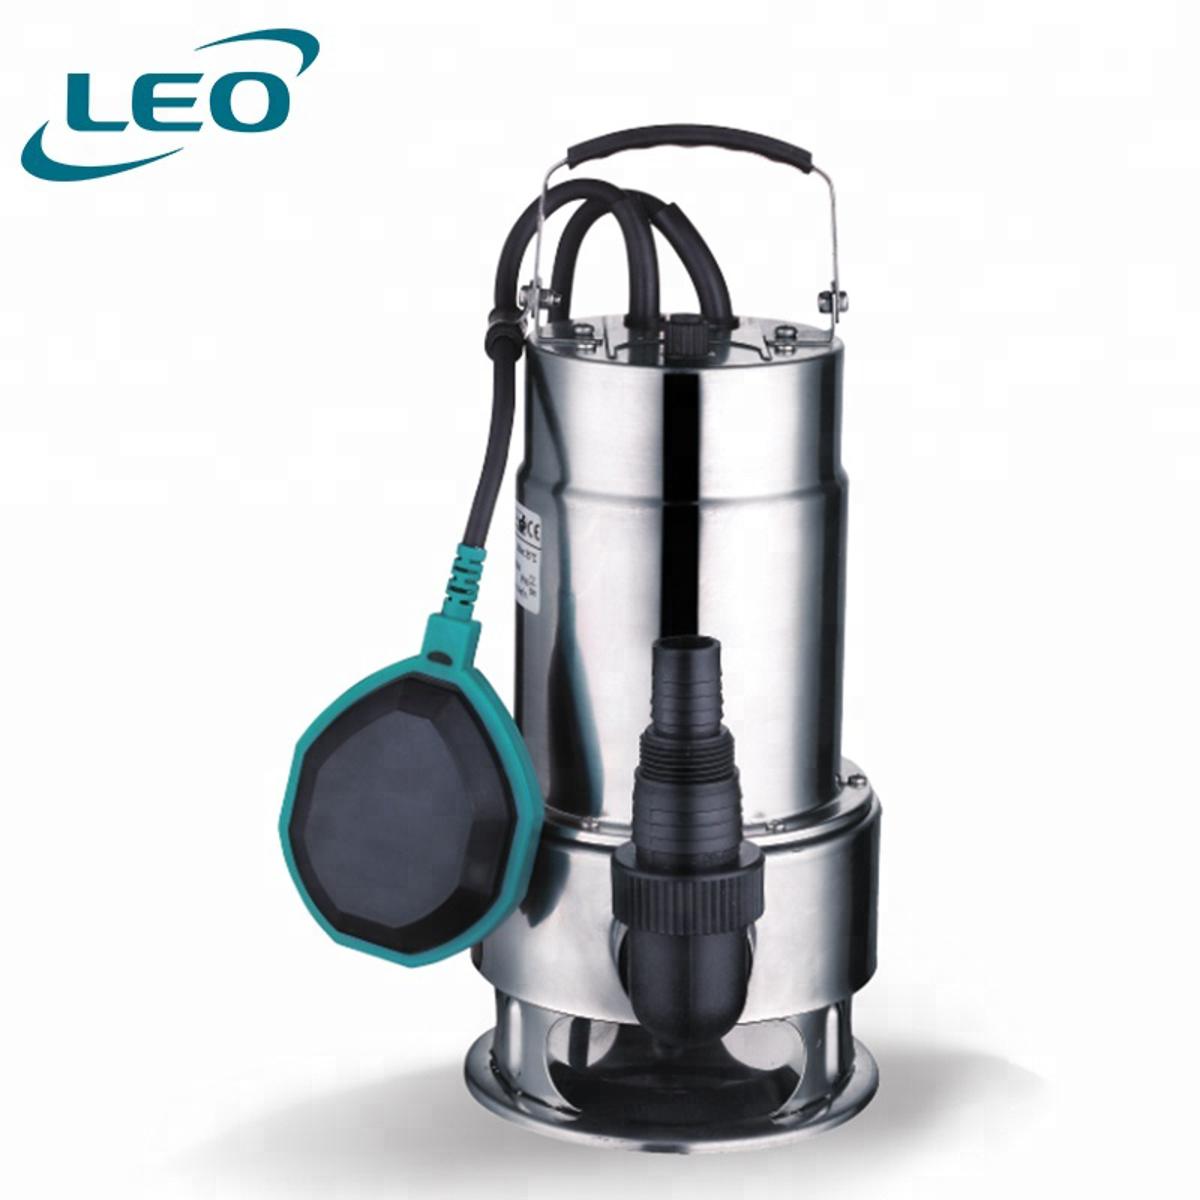 LEO - XKS-750SW - 750 W - 1.0 HP  Stainless Steel DIRTY Water Submersible Pump With FLOAT SWITCH FOR AUTOMATIC OPERATION- European STANDARD Water Pump